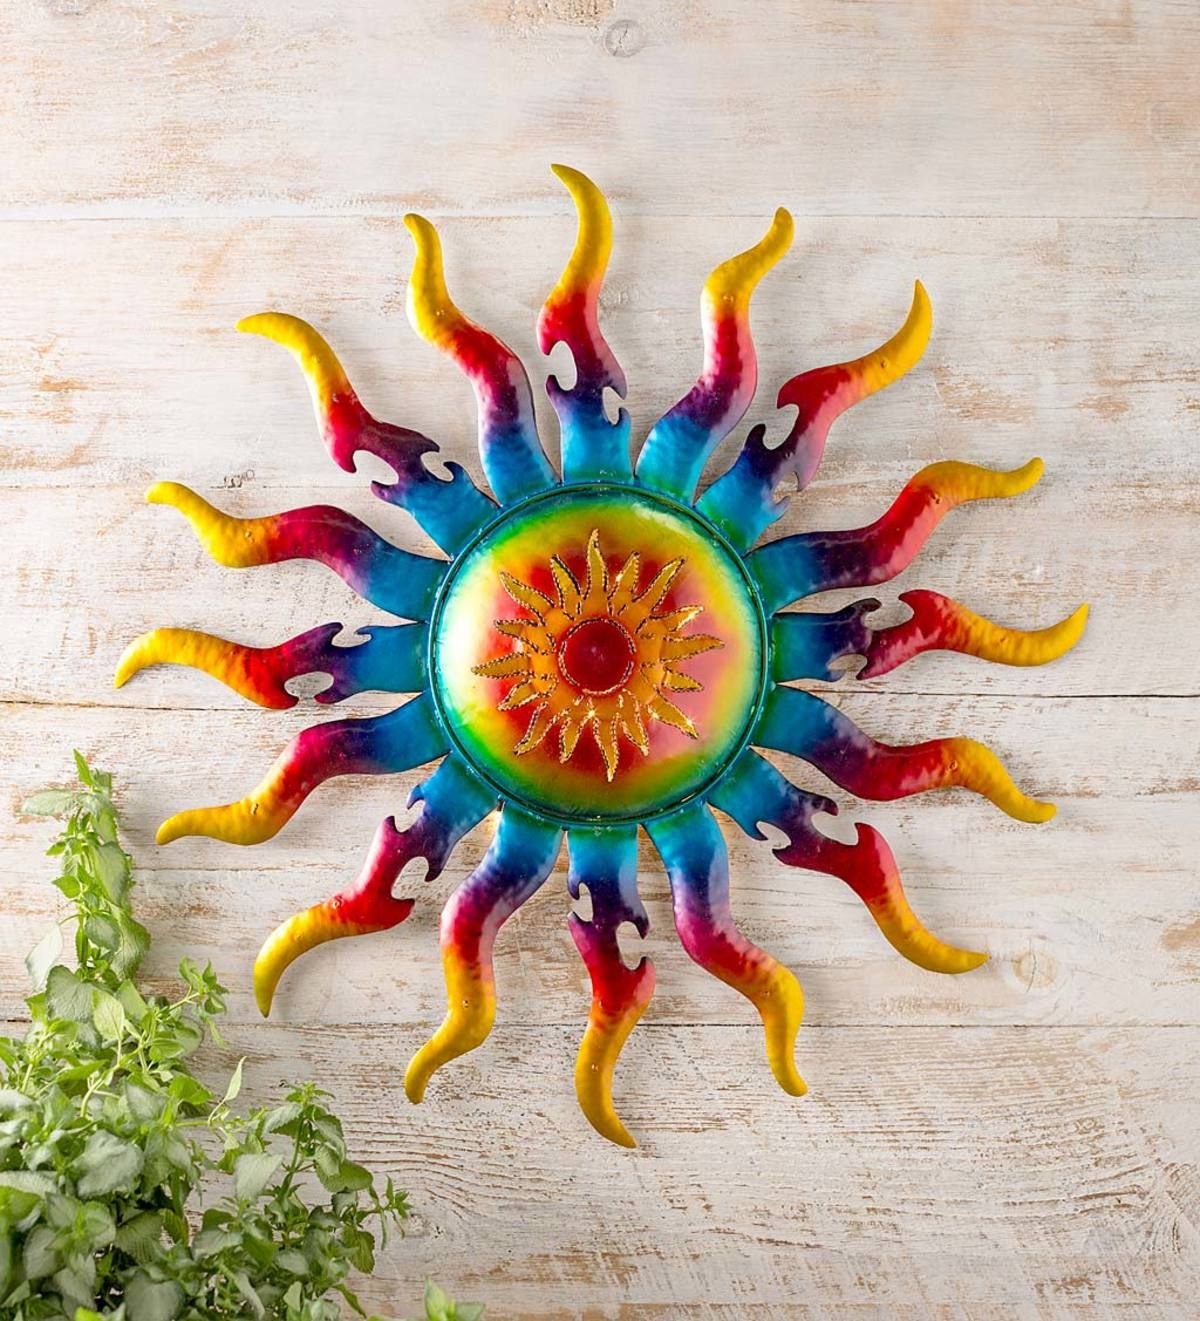 Handcrafted Lighted Metal Sun Wall Art | Wind And Weather For Sun Wall Art (View 13 of 15)